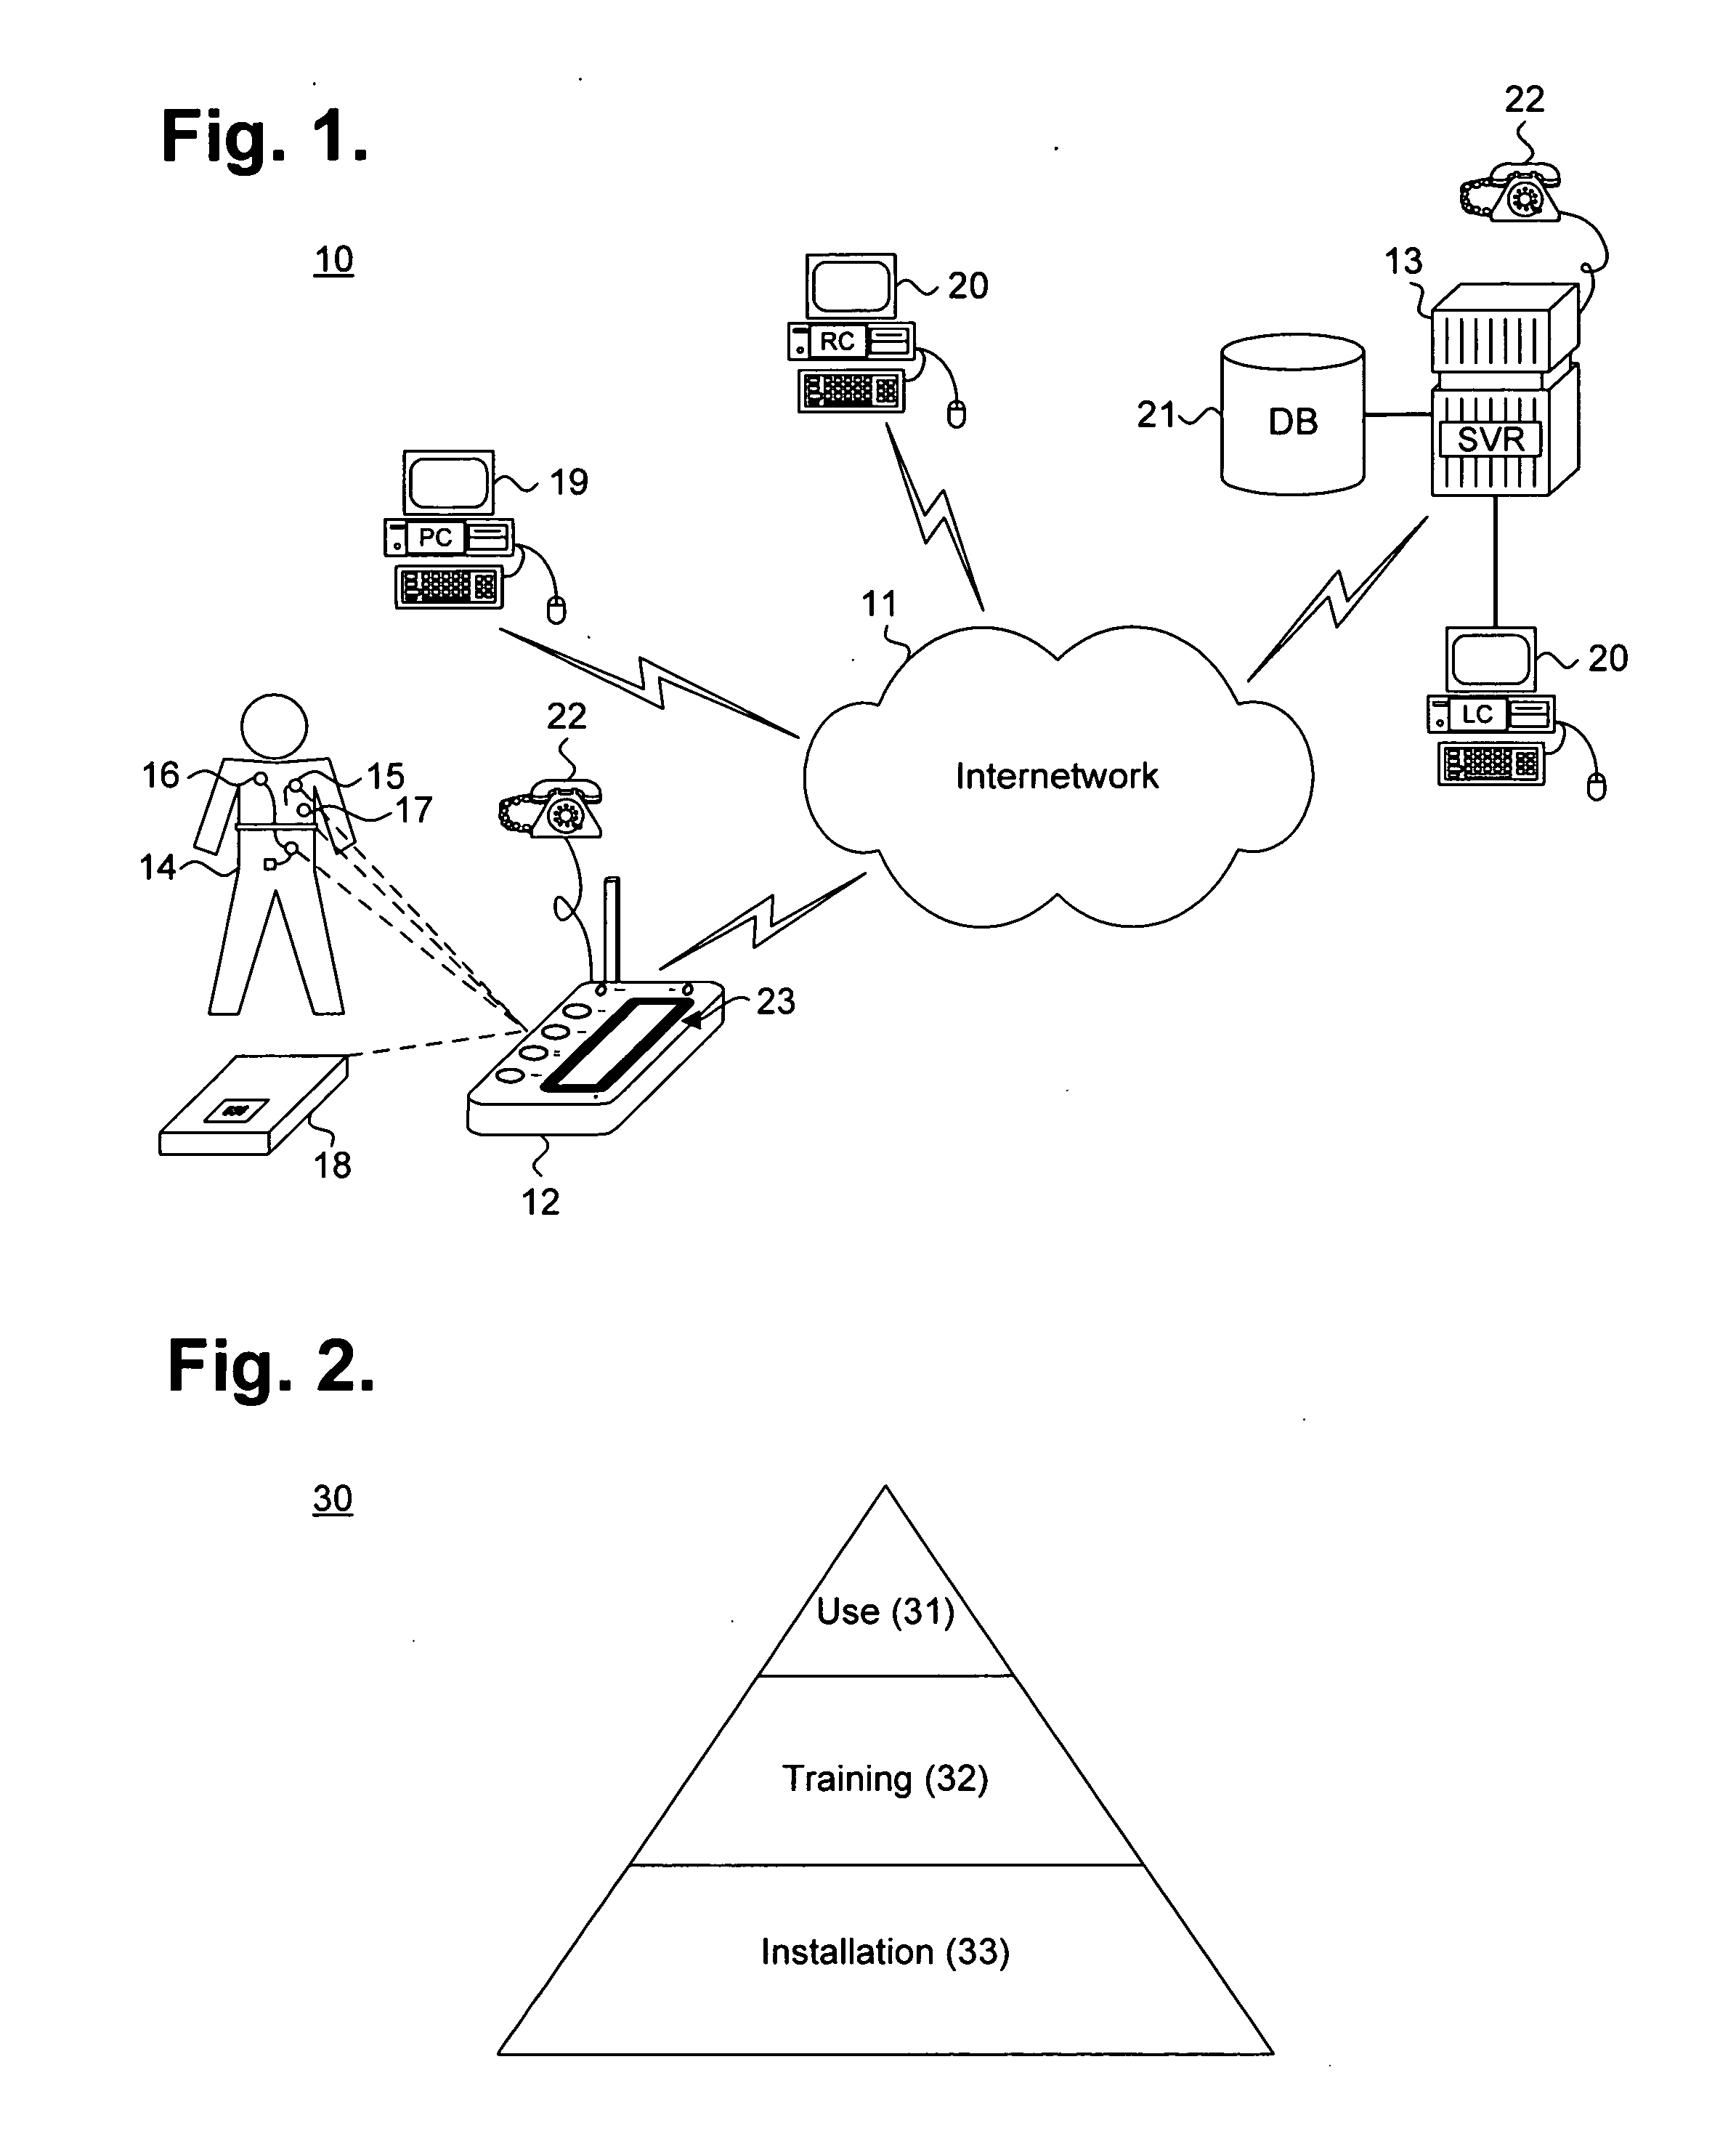 System and method for providing automatic setup of a remote patient care environment